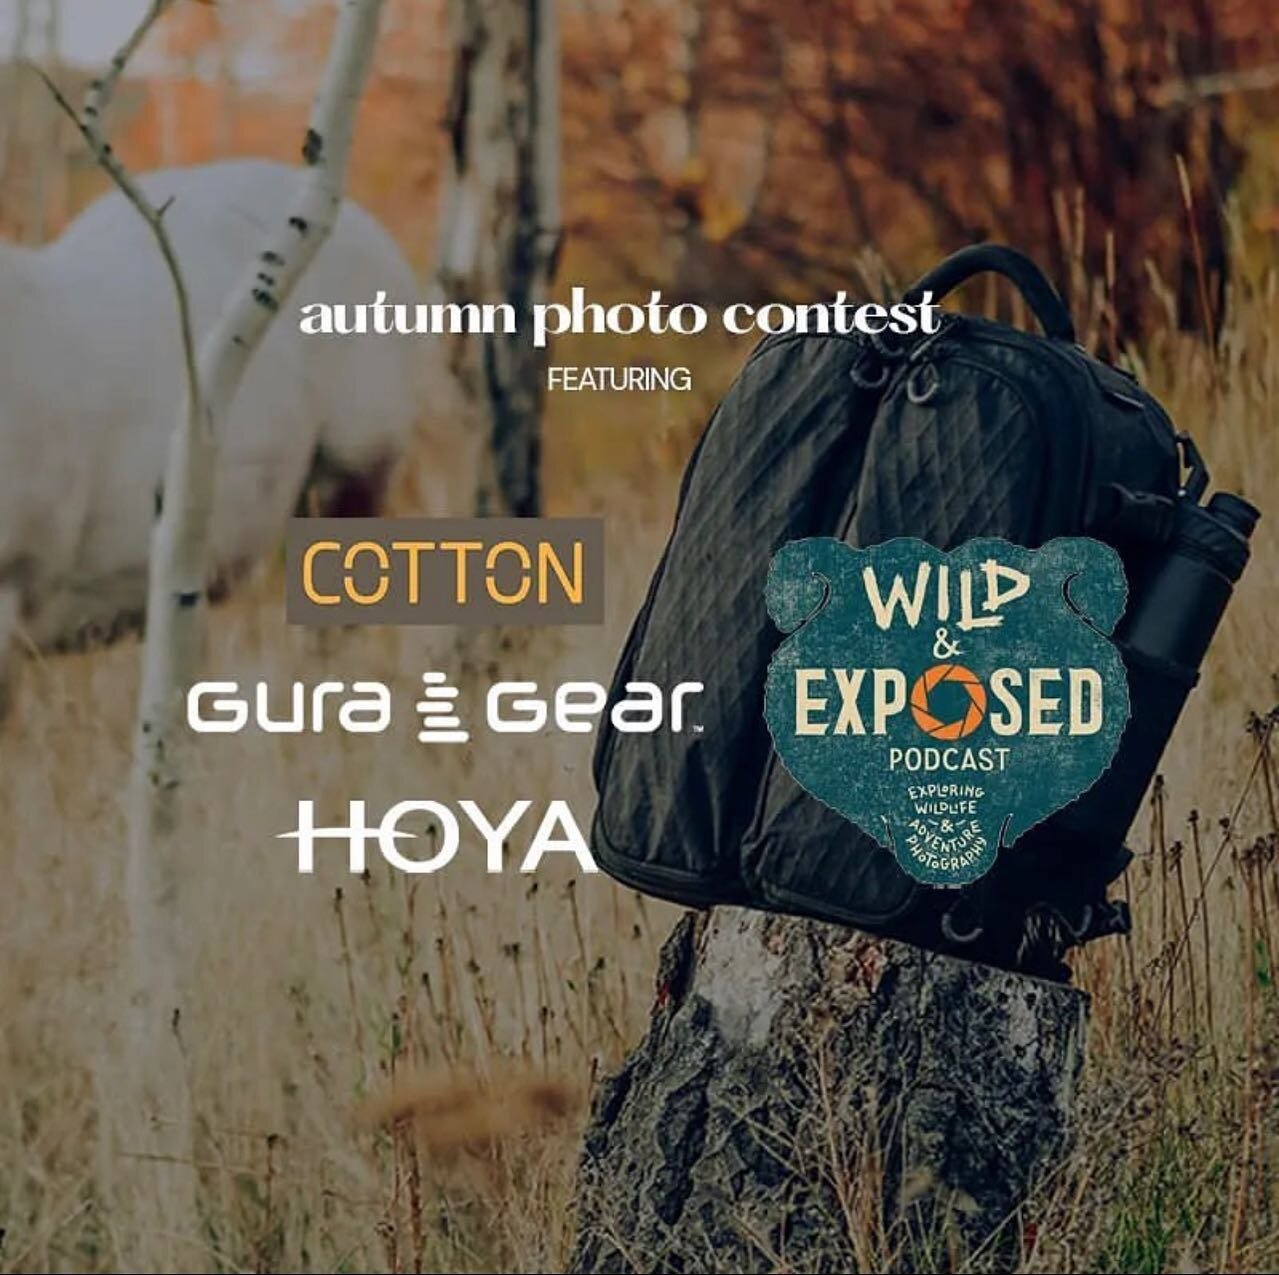 Gura Gear, Cotton Carrier, Wild &amp; Exposed Podcast, UntamedImagesbyJL, and Hoya Filters USA have come together to host an Autumn Photo Contest this October/November.
🍂🍂🍂🍂🍂🍂🍂🍂🍂🍂
Submit your best Autumn photos to win prizes totaling over $